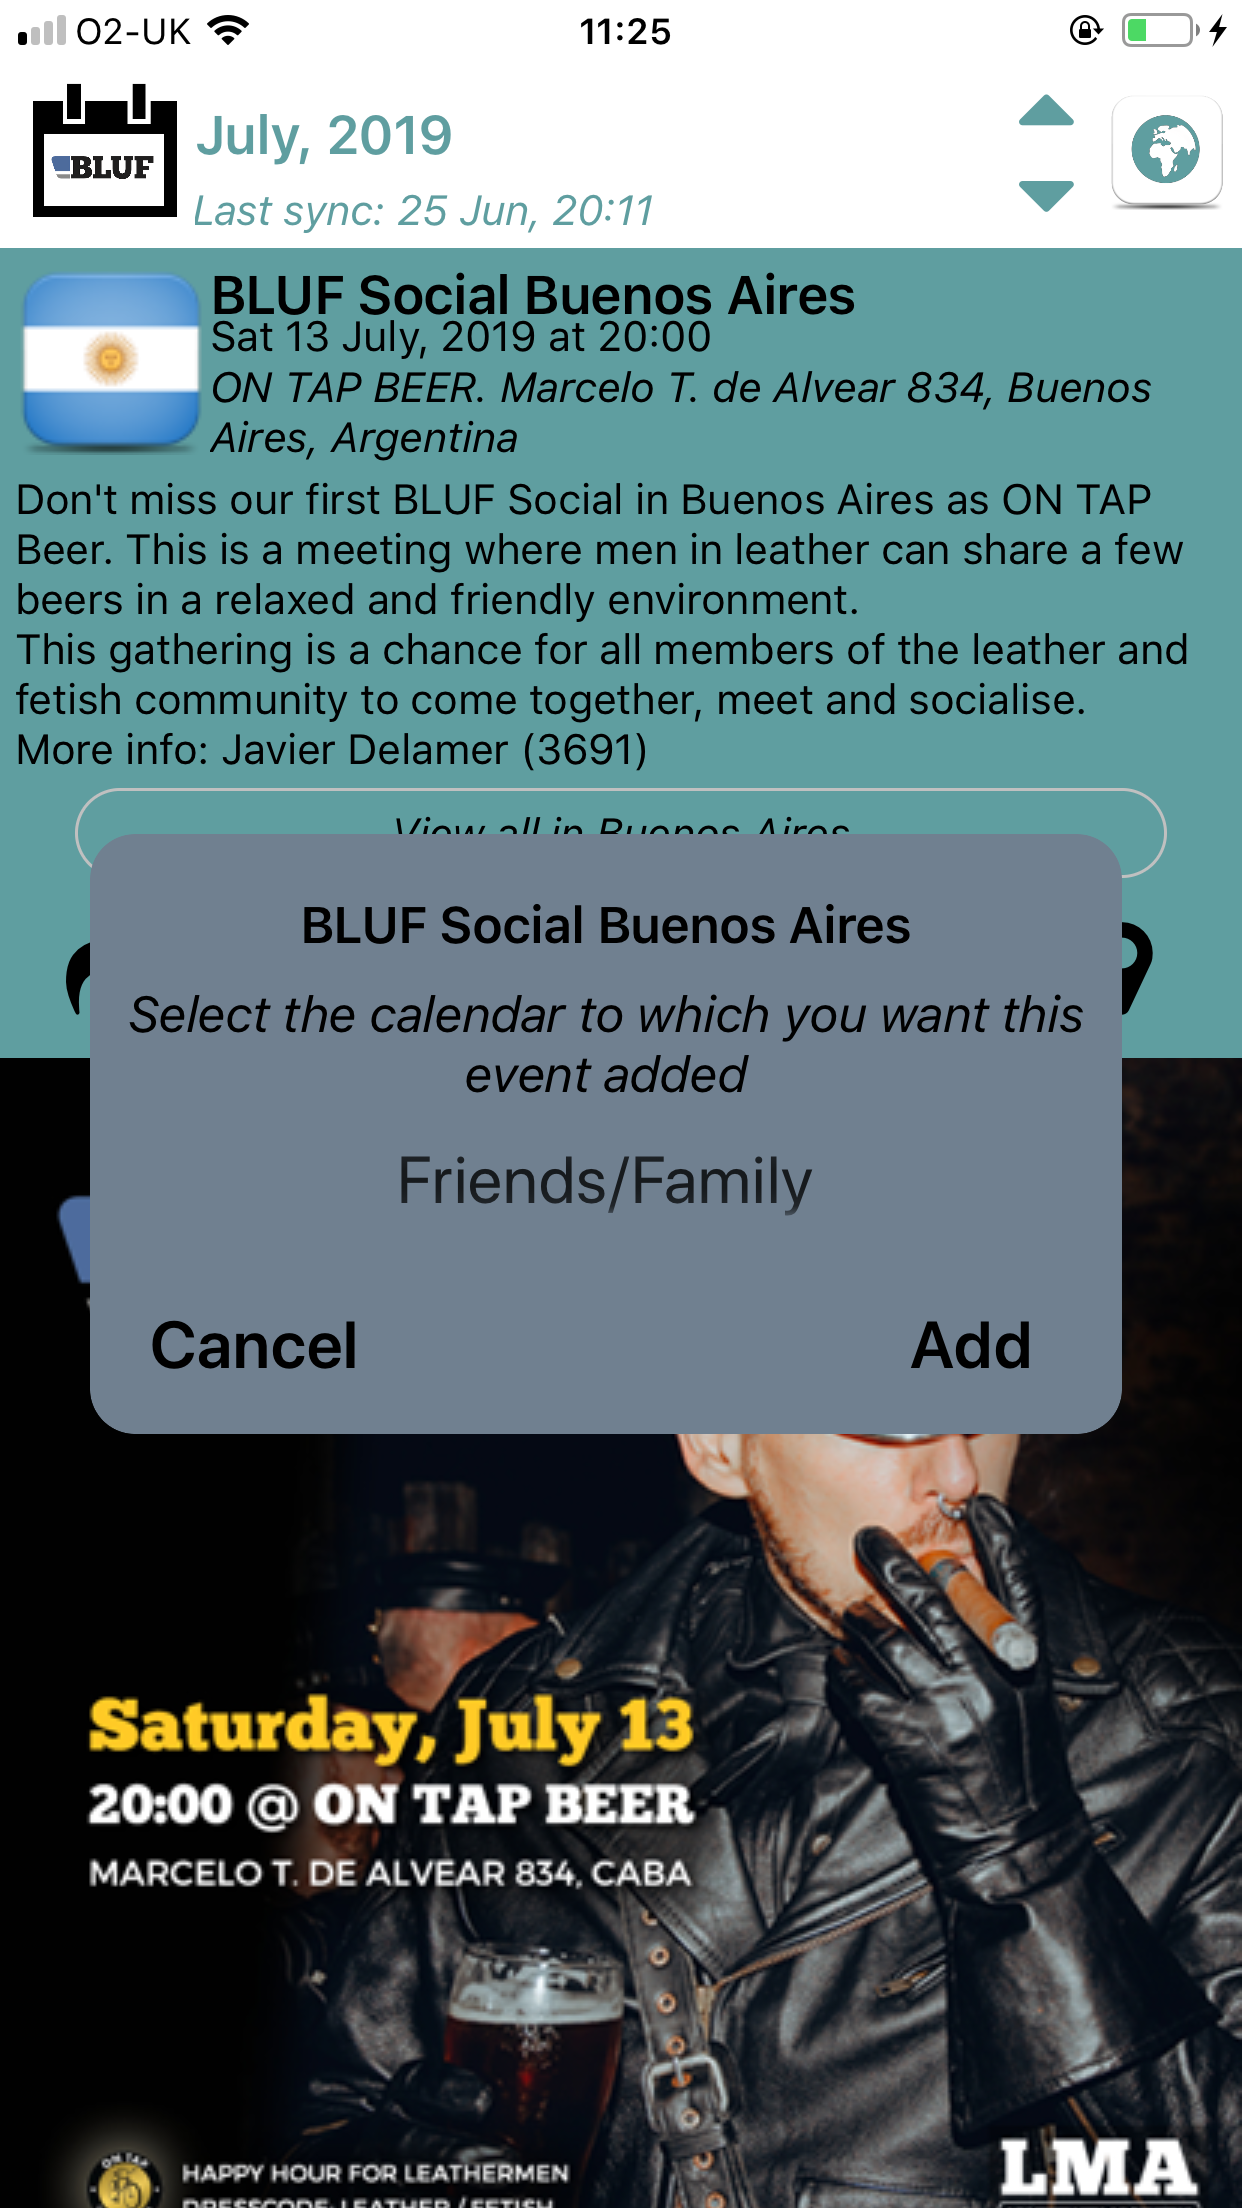 Adding an event to your personal calendar